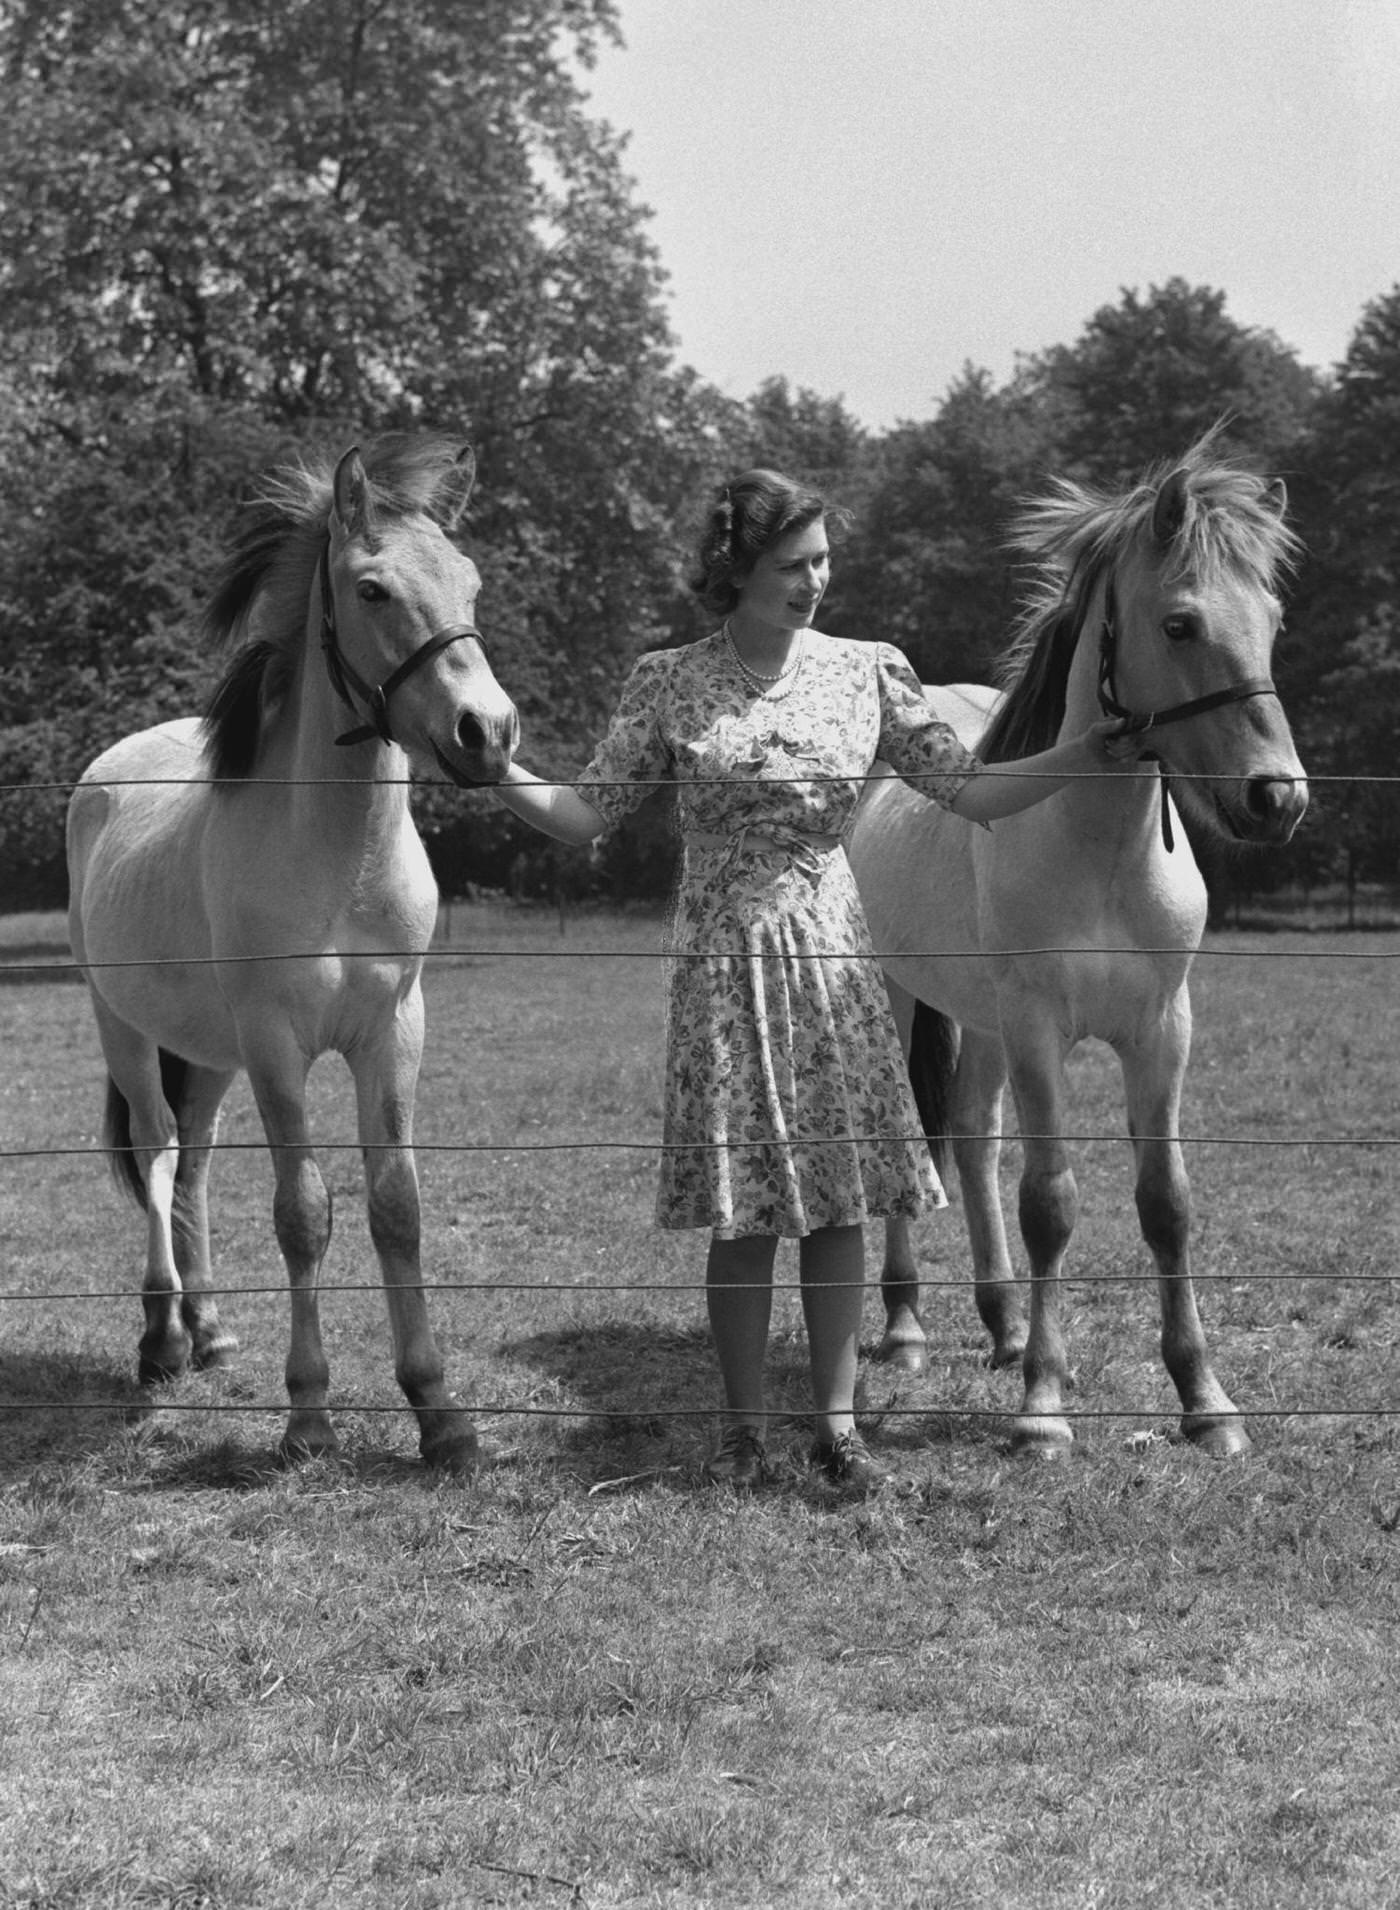 Princess Elizabeth pictured holding the reins of two horses in the garden at Windsor Castle, 1944Princess Elizabeth pictured holding the reins of two horses in the garden at Windsor Castle, 1944